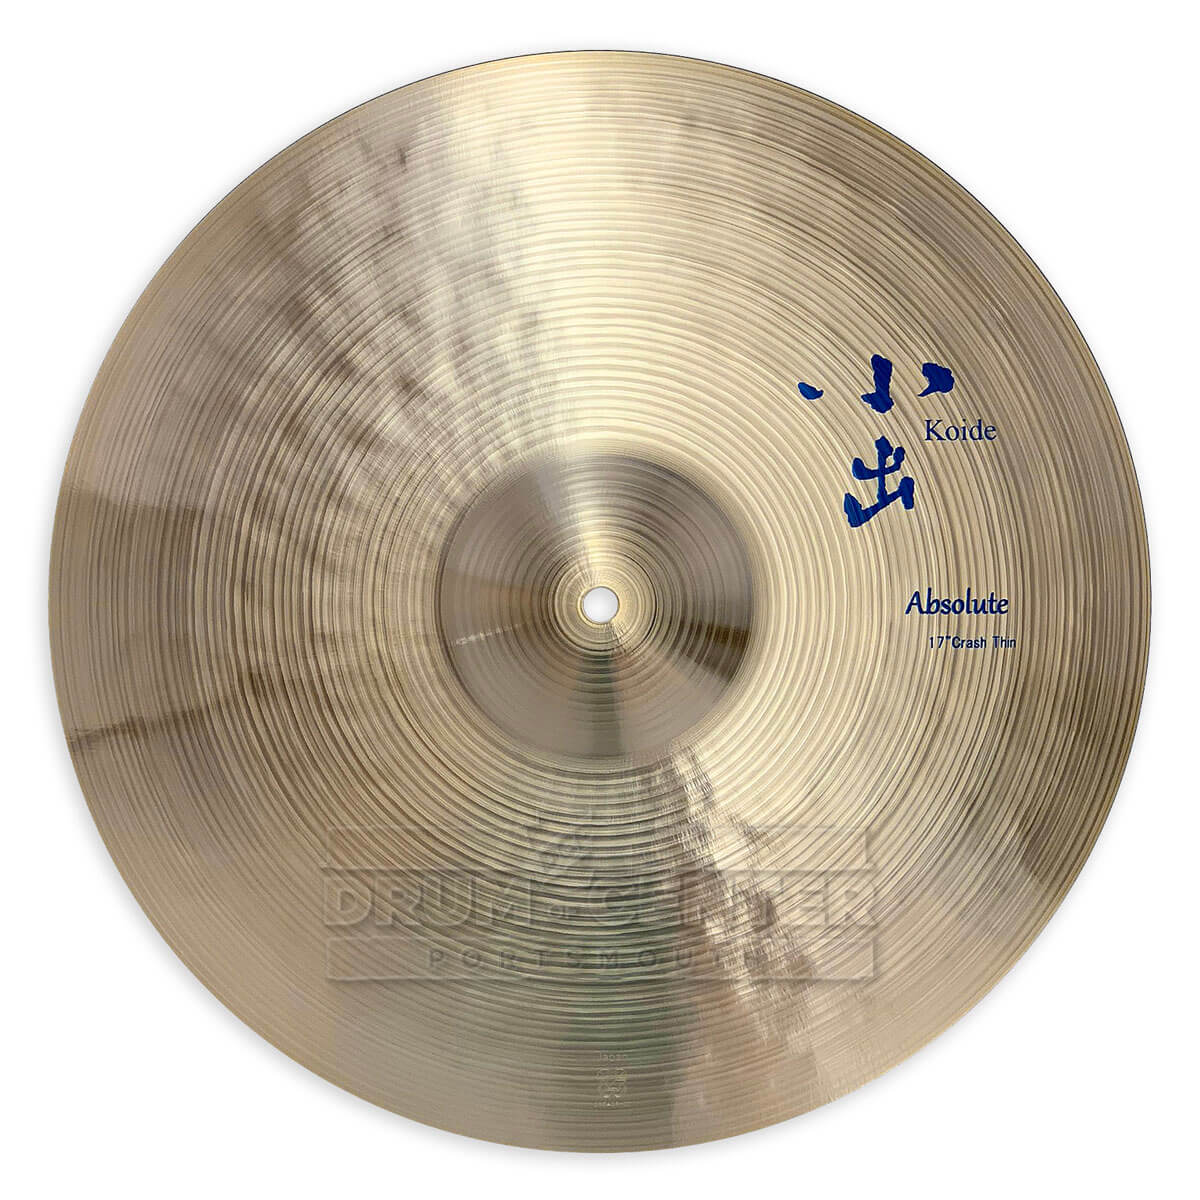 Koide Absolute Thin Crash Cymbal 17" 2 grams - Drum Center Of Portsmouth